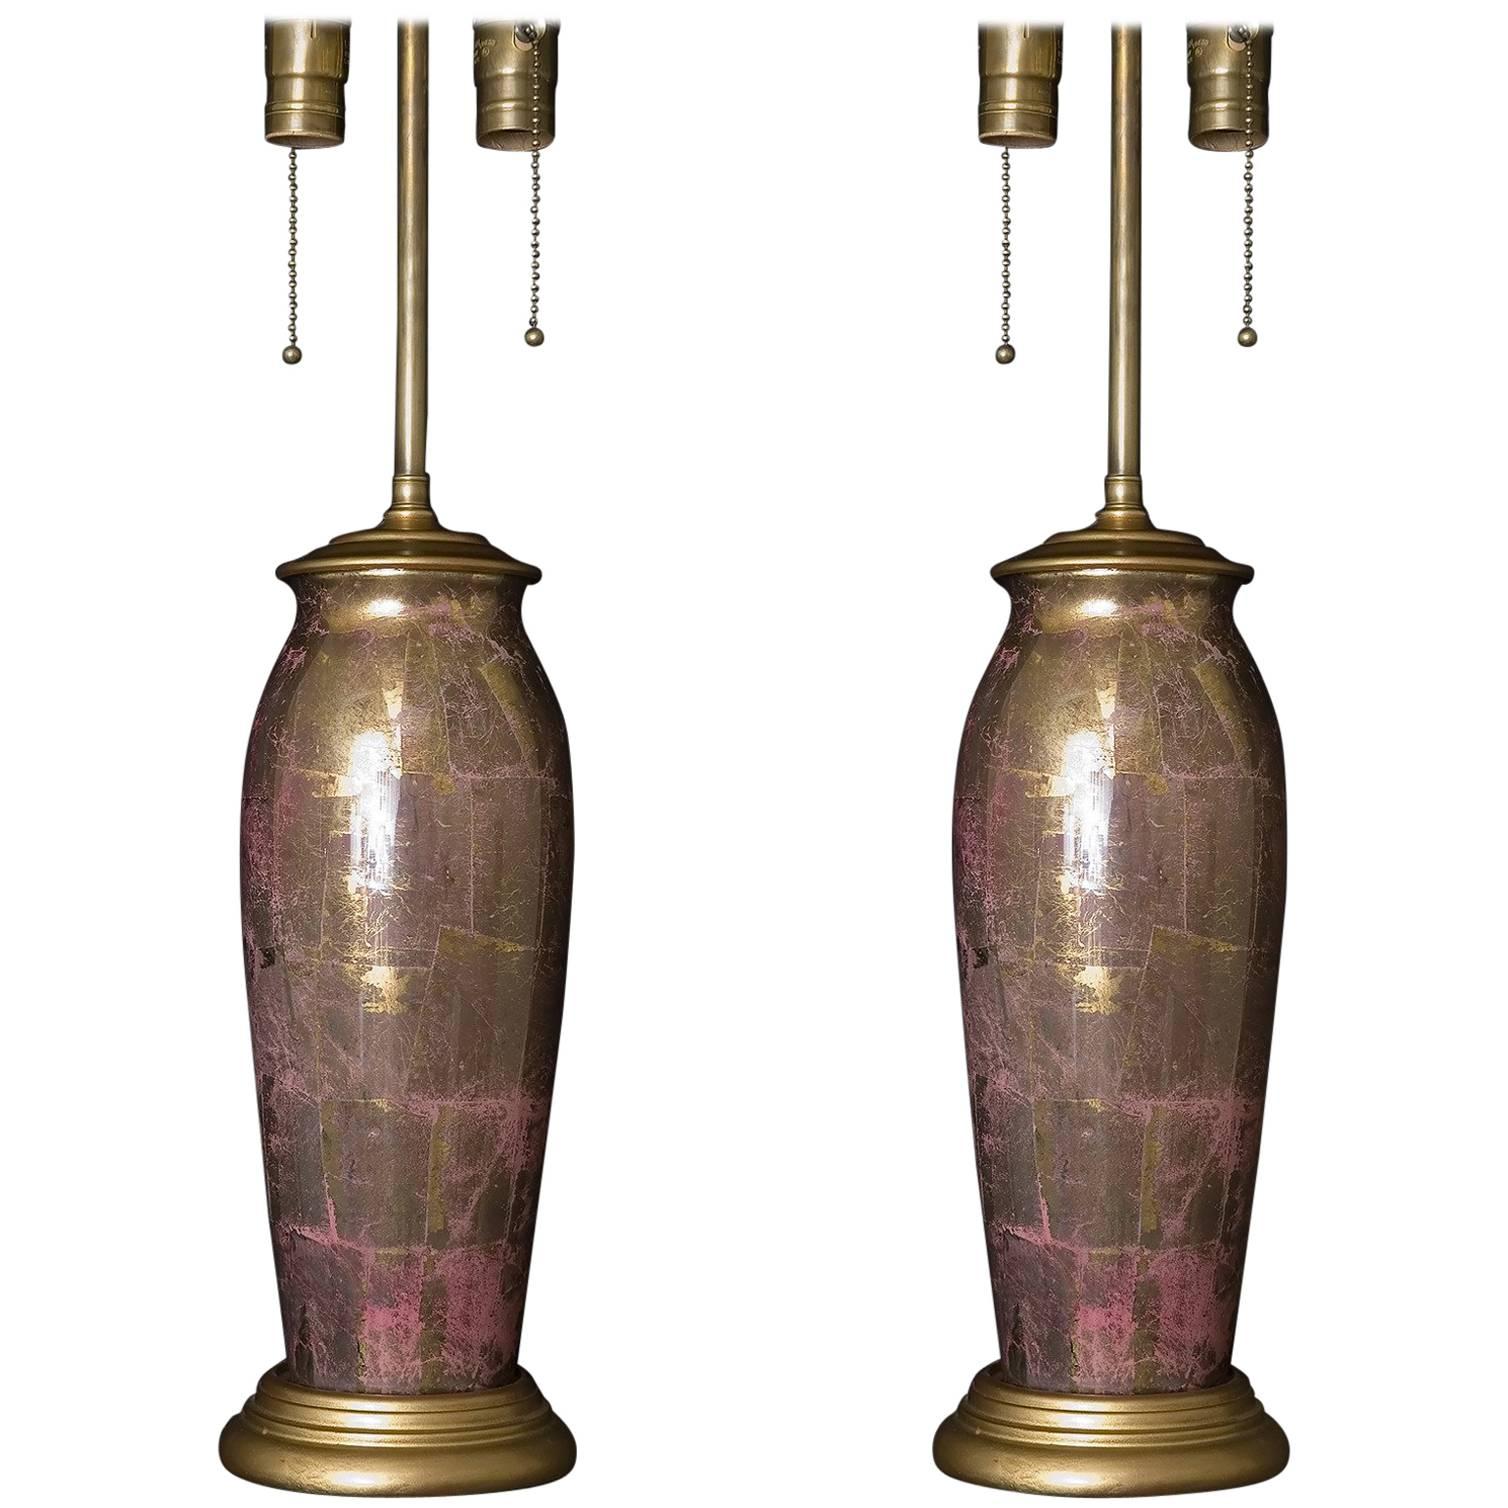 1930s Pair of French Pink and Gold Glass Decoupage Table Lamps